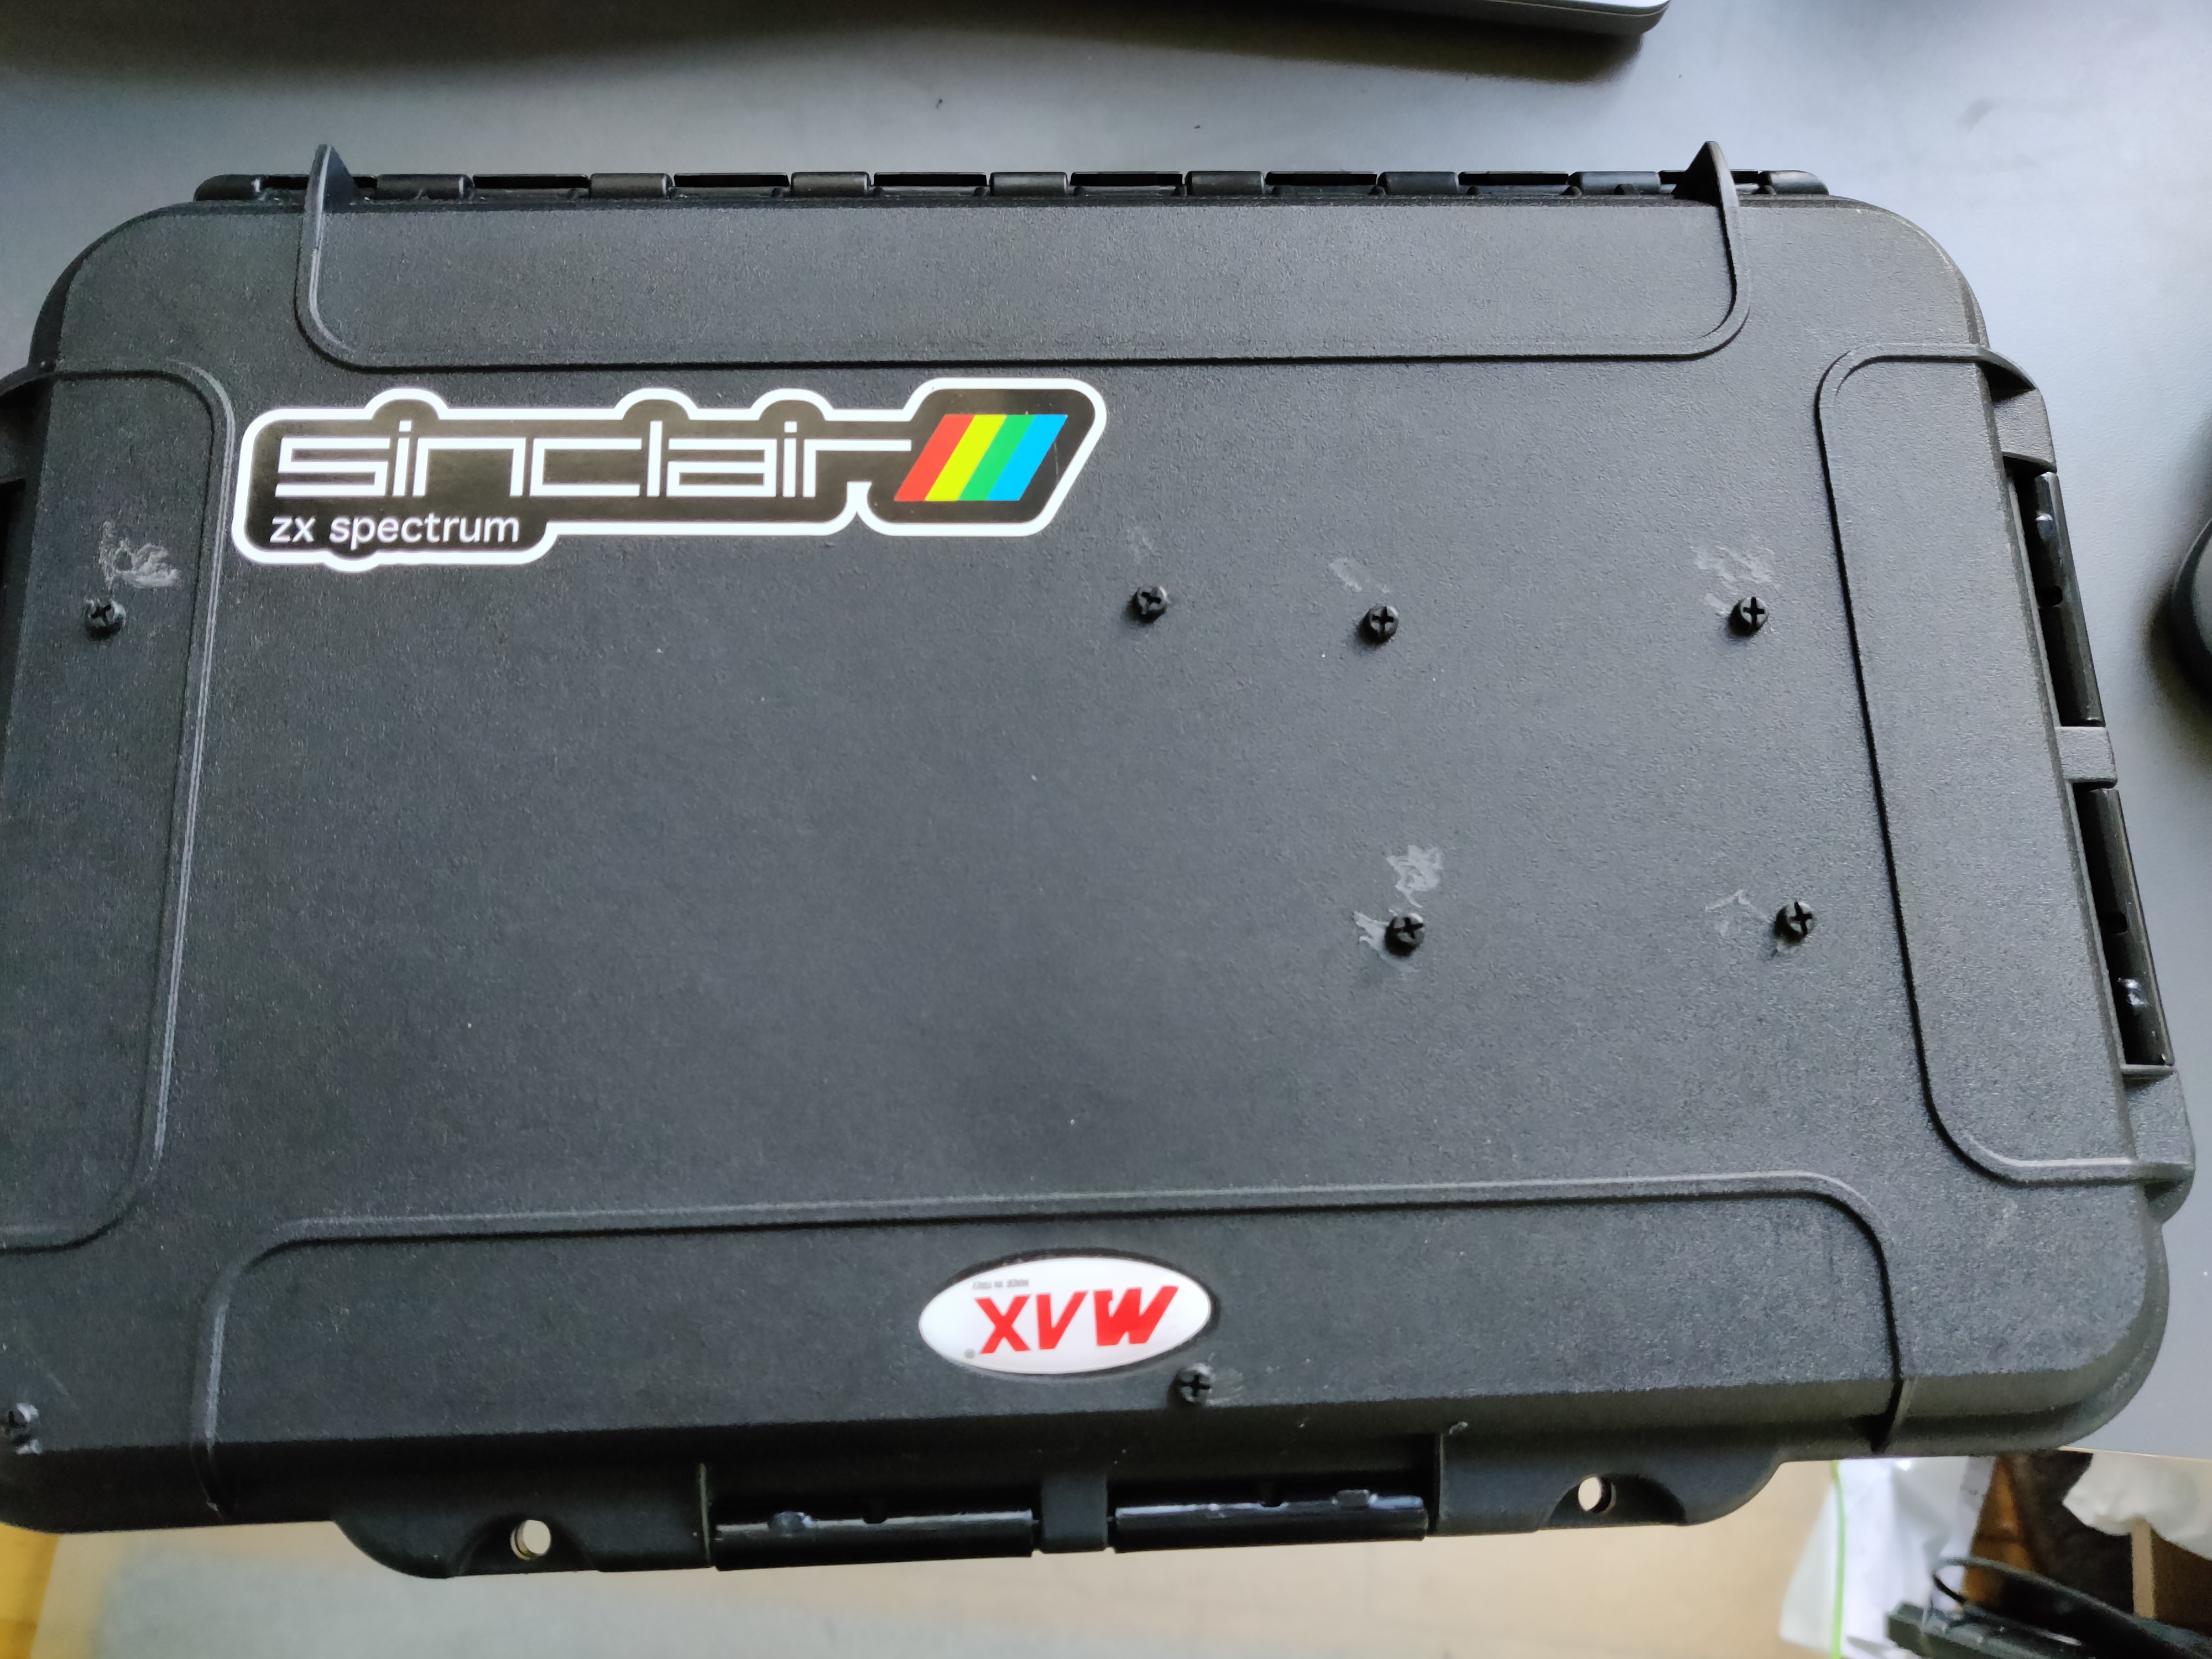 The case, closed, with a third-party "Sinclair ZX Spectrum" sticker on it